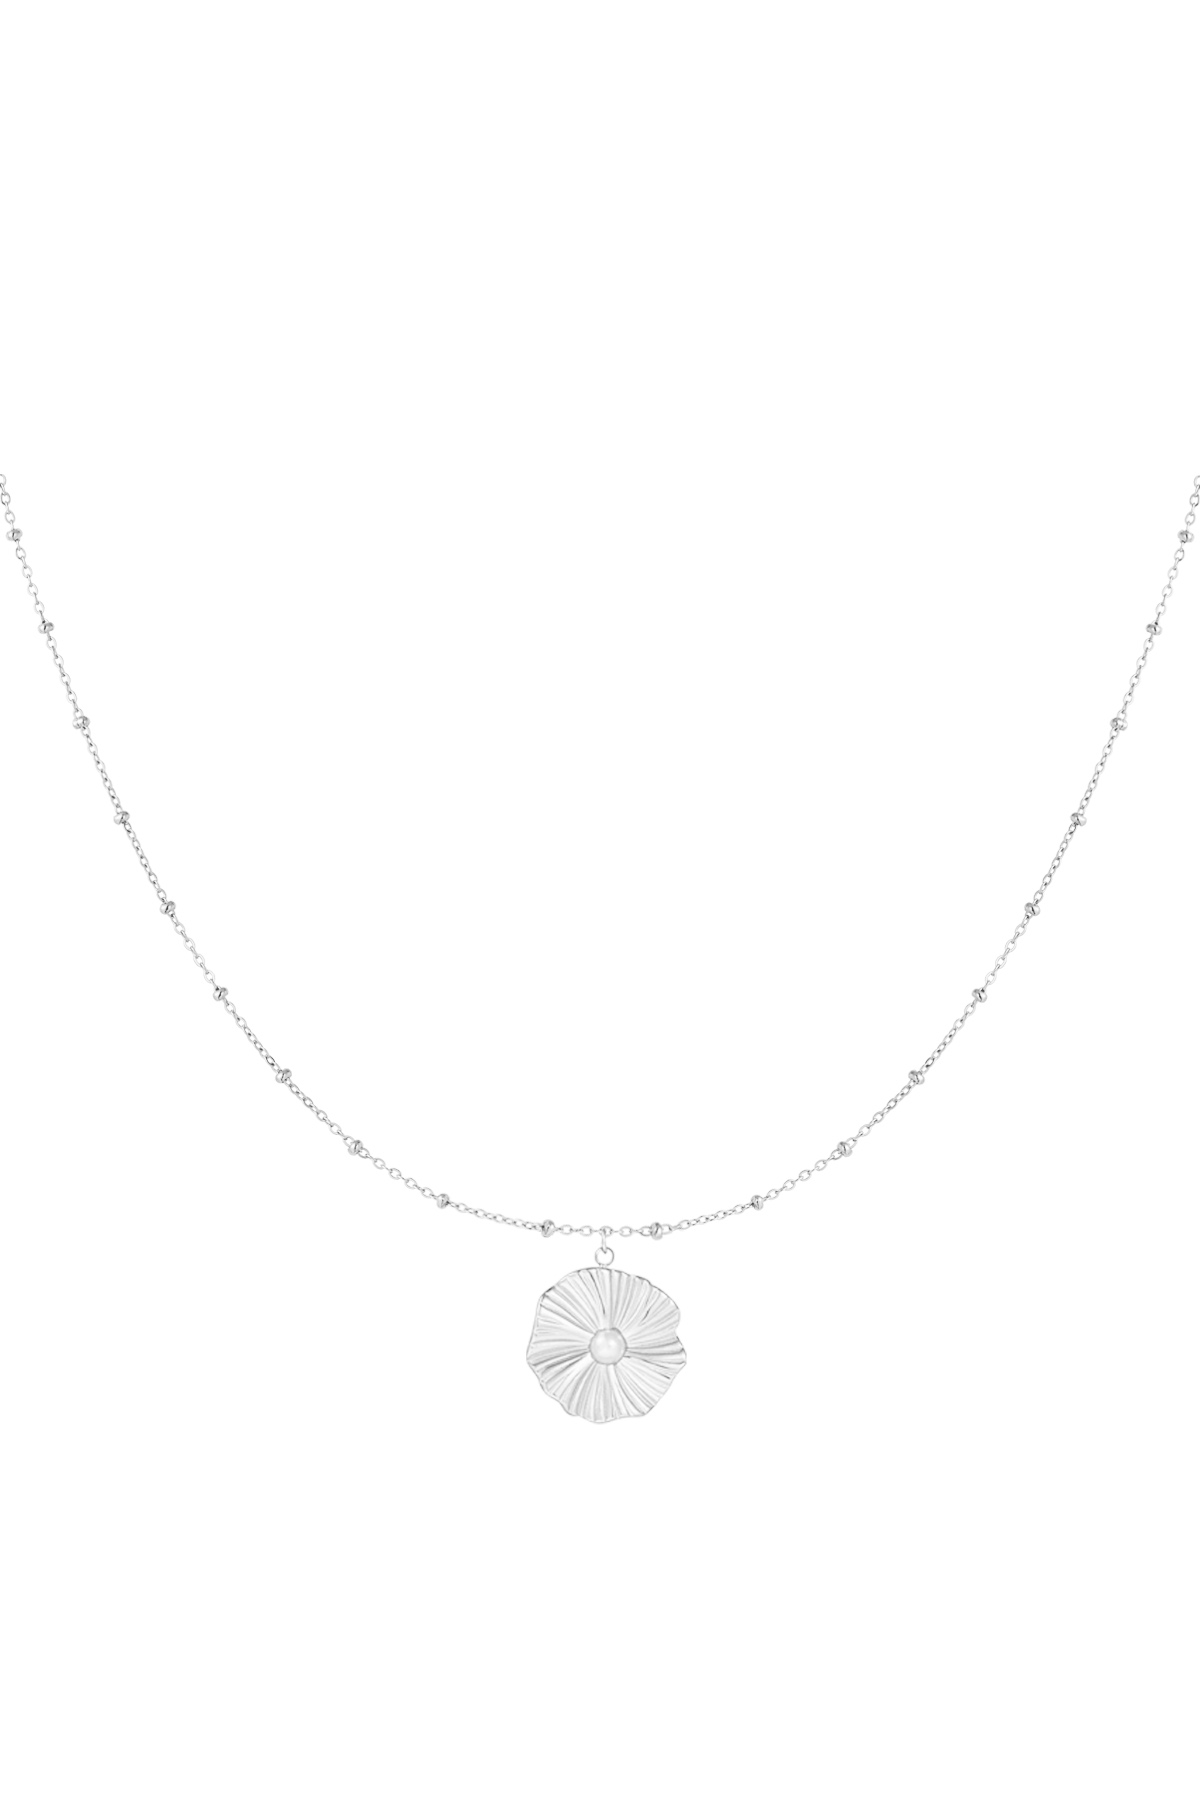 ball necklace with simple flower - silver